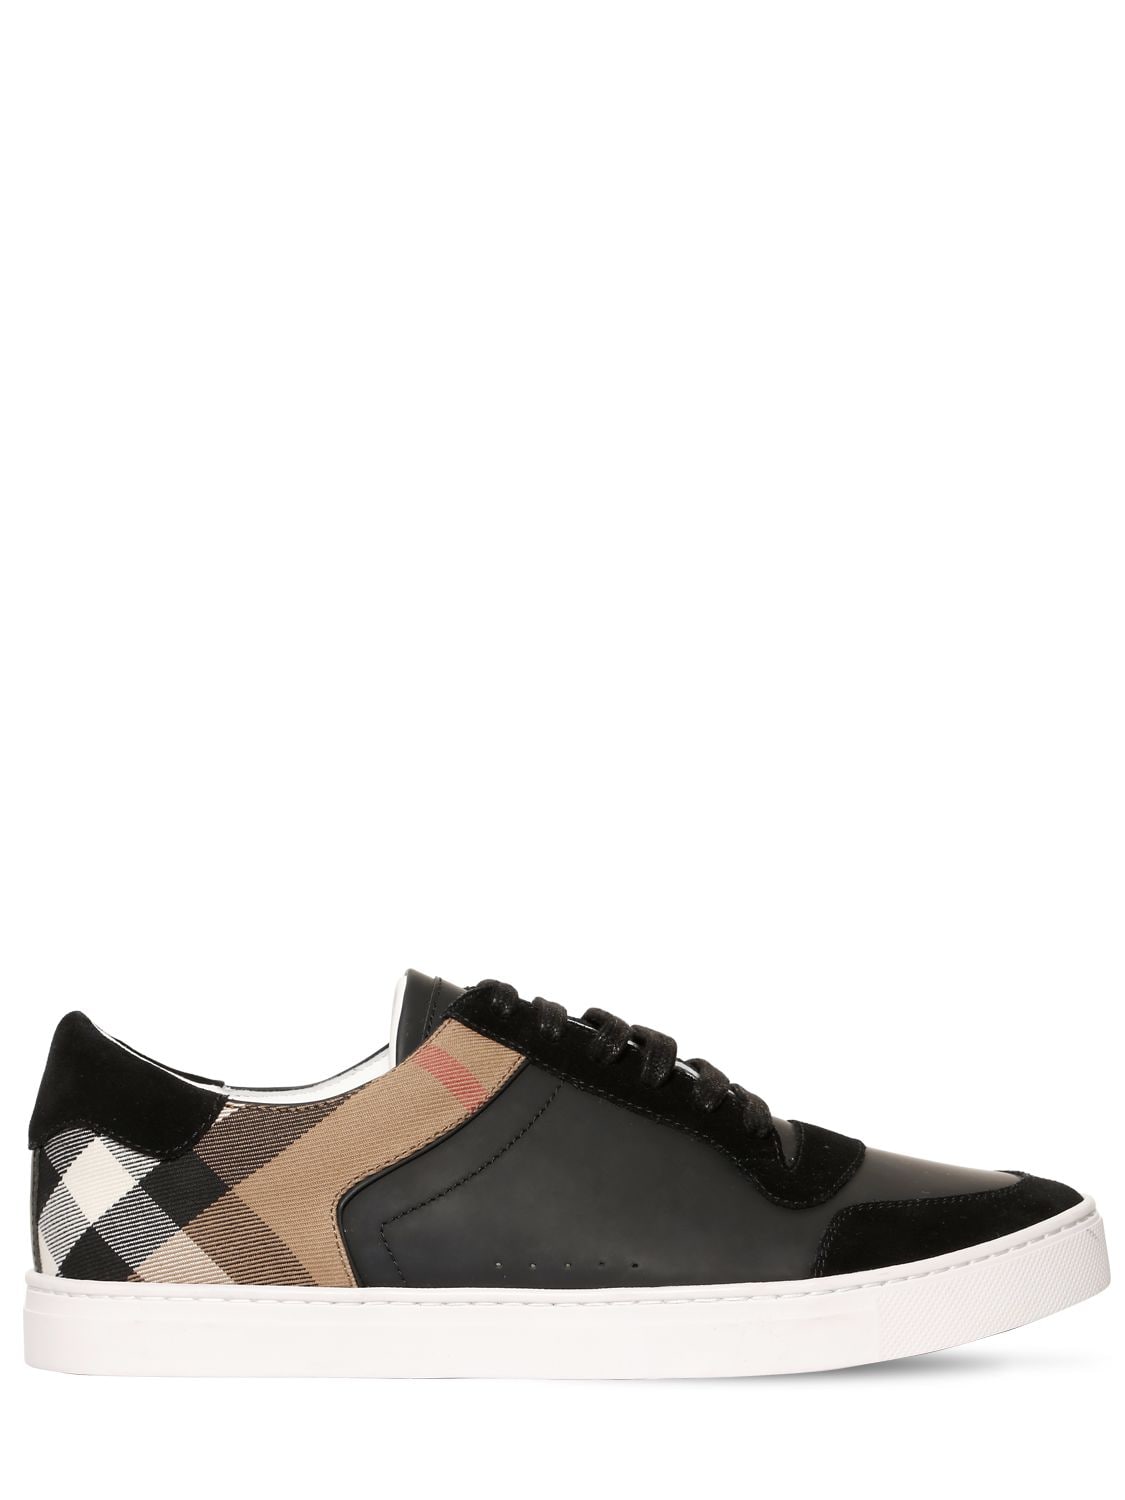 Burberry Newport Check Canvas & Leather Trainers In Black